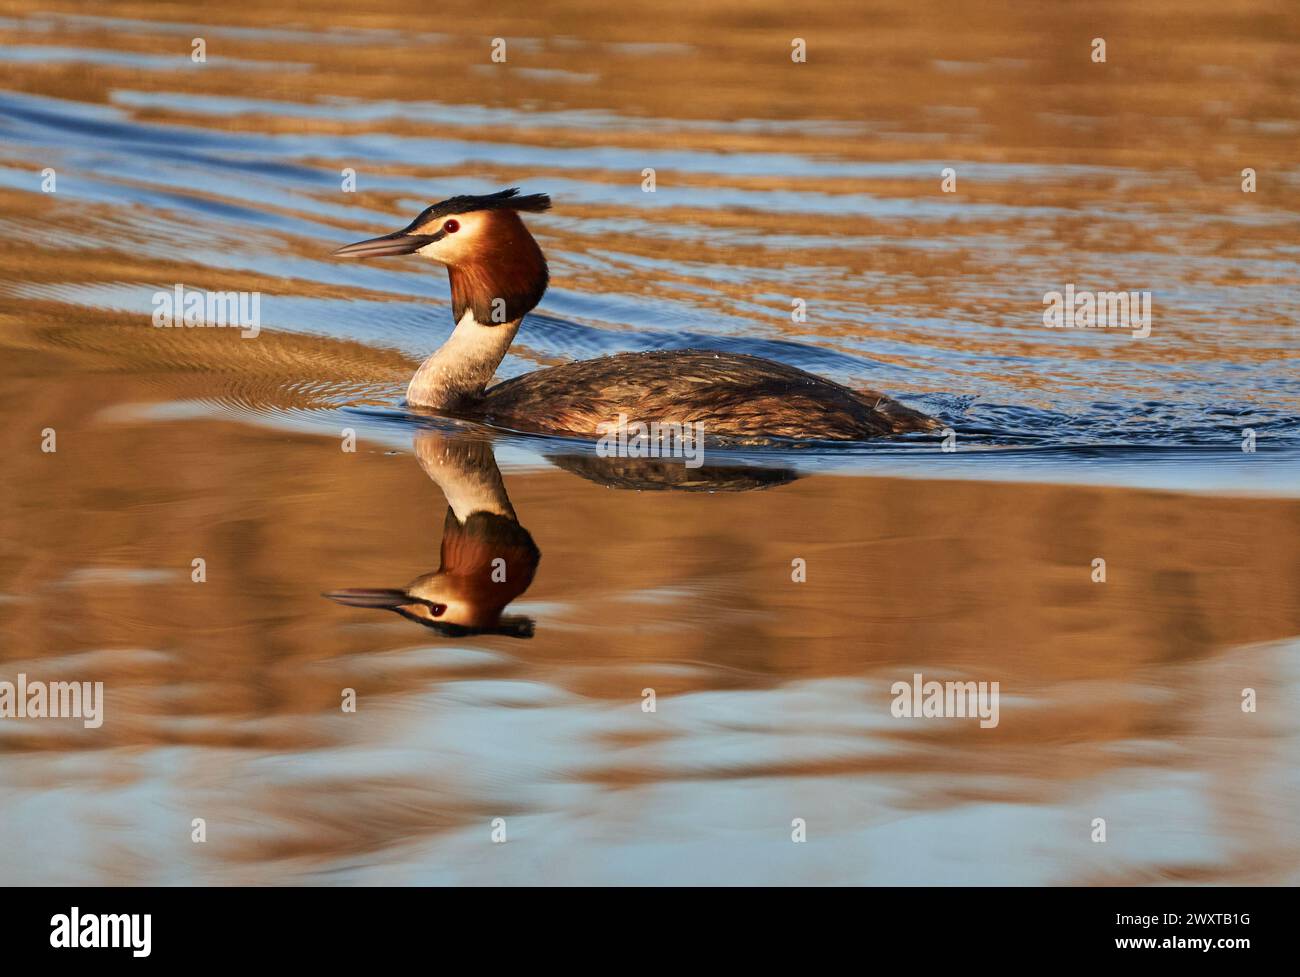 Great crested grebe (Podiceps cristatus) swimming on a calm lake in the evening Stock Photo